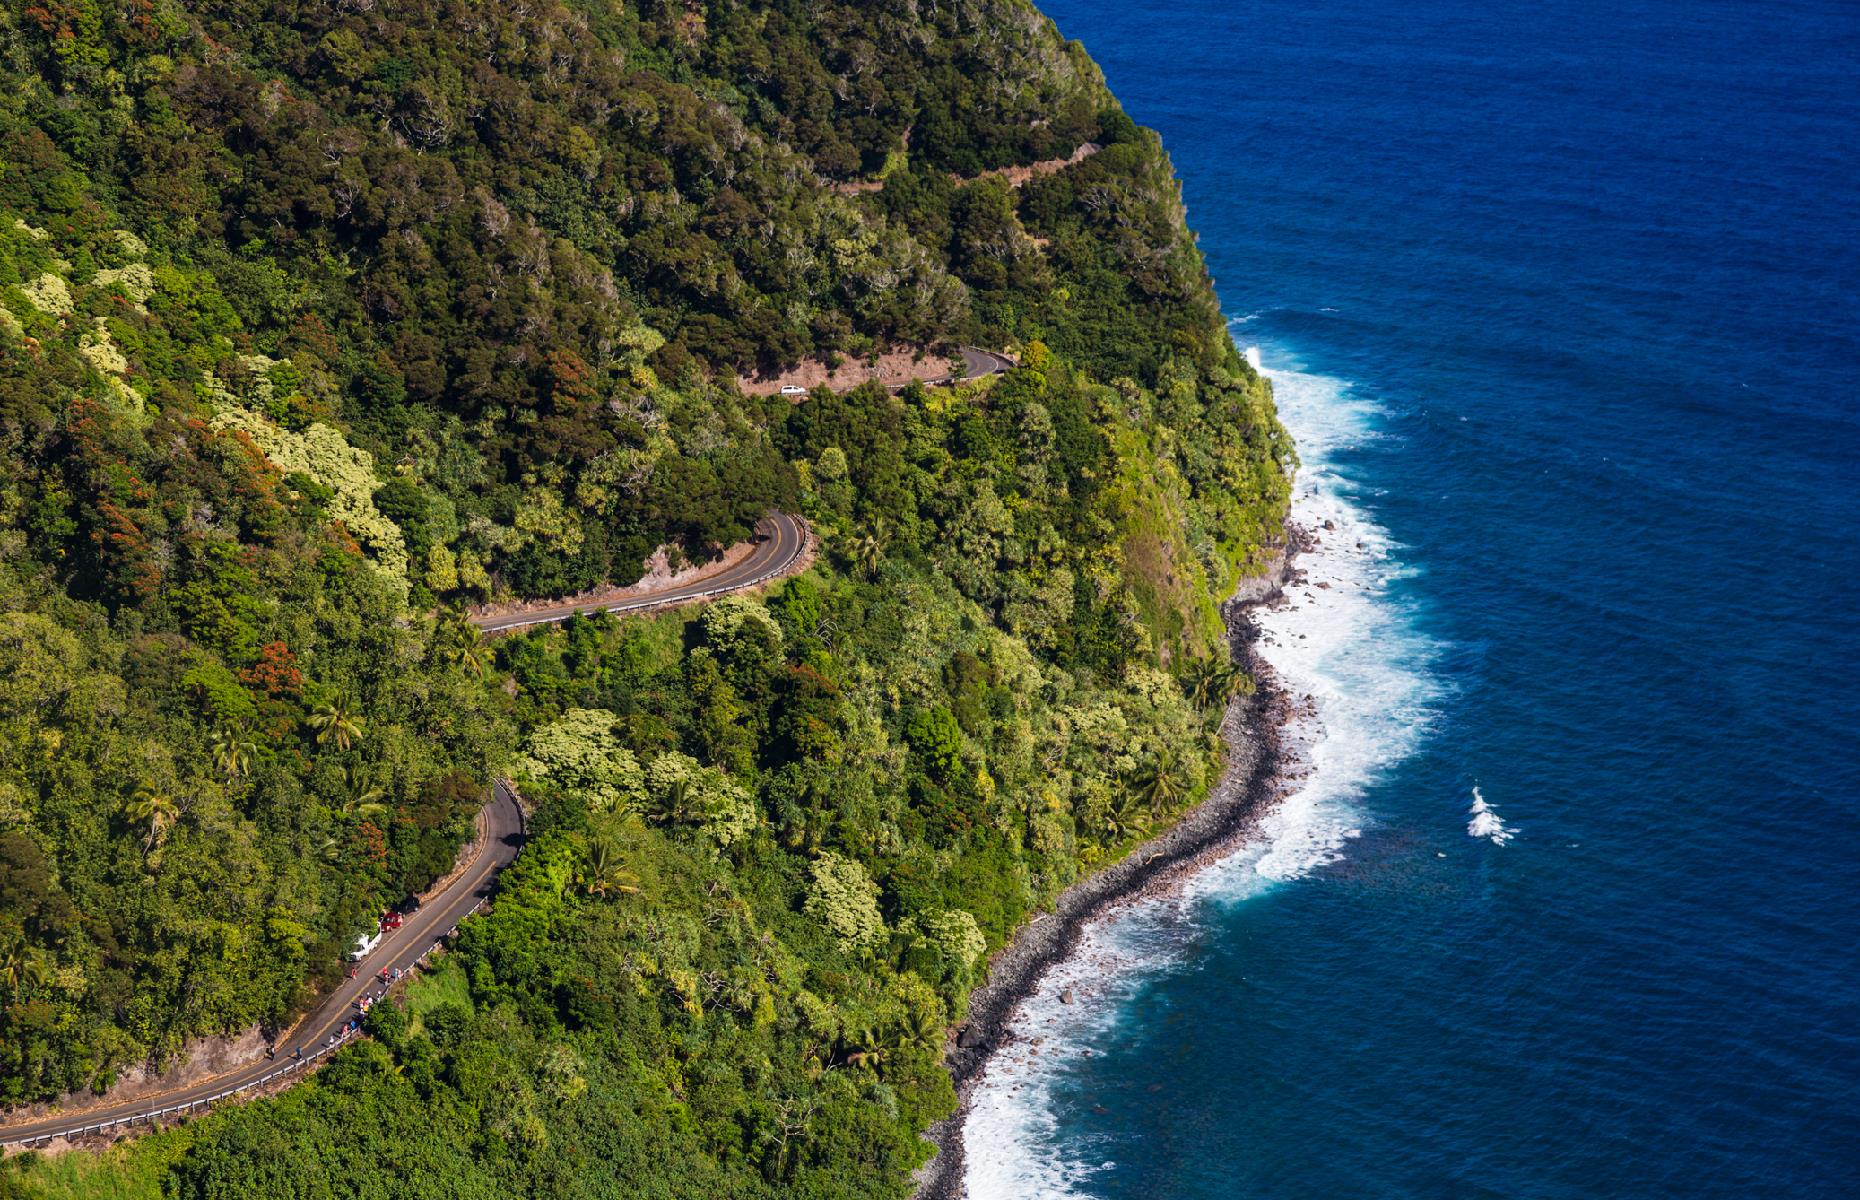 <p>The Road to Hana, or Hana Highway, in Maui is probably Hawaii's best-known road trip. Spooling out for around 52 miles (84km), the route offers pinch-me views of Maui's eastern coastline, slicing through forest and whisking drivers past waterfalls and across dramatic bridges. You'll finish up in the village of Hana, where you can enjoy life at a slower pace for a while. </p>  <p><a href="https://www.loveexploring.com/galleries/97470/most-beautiful-scenic-byway-in-every-state?page=1"><strong>Discover the most beautiful byway in every state</strong></a></p>